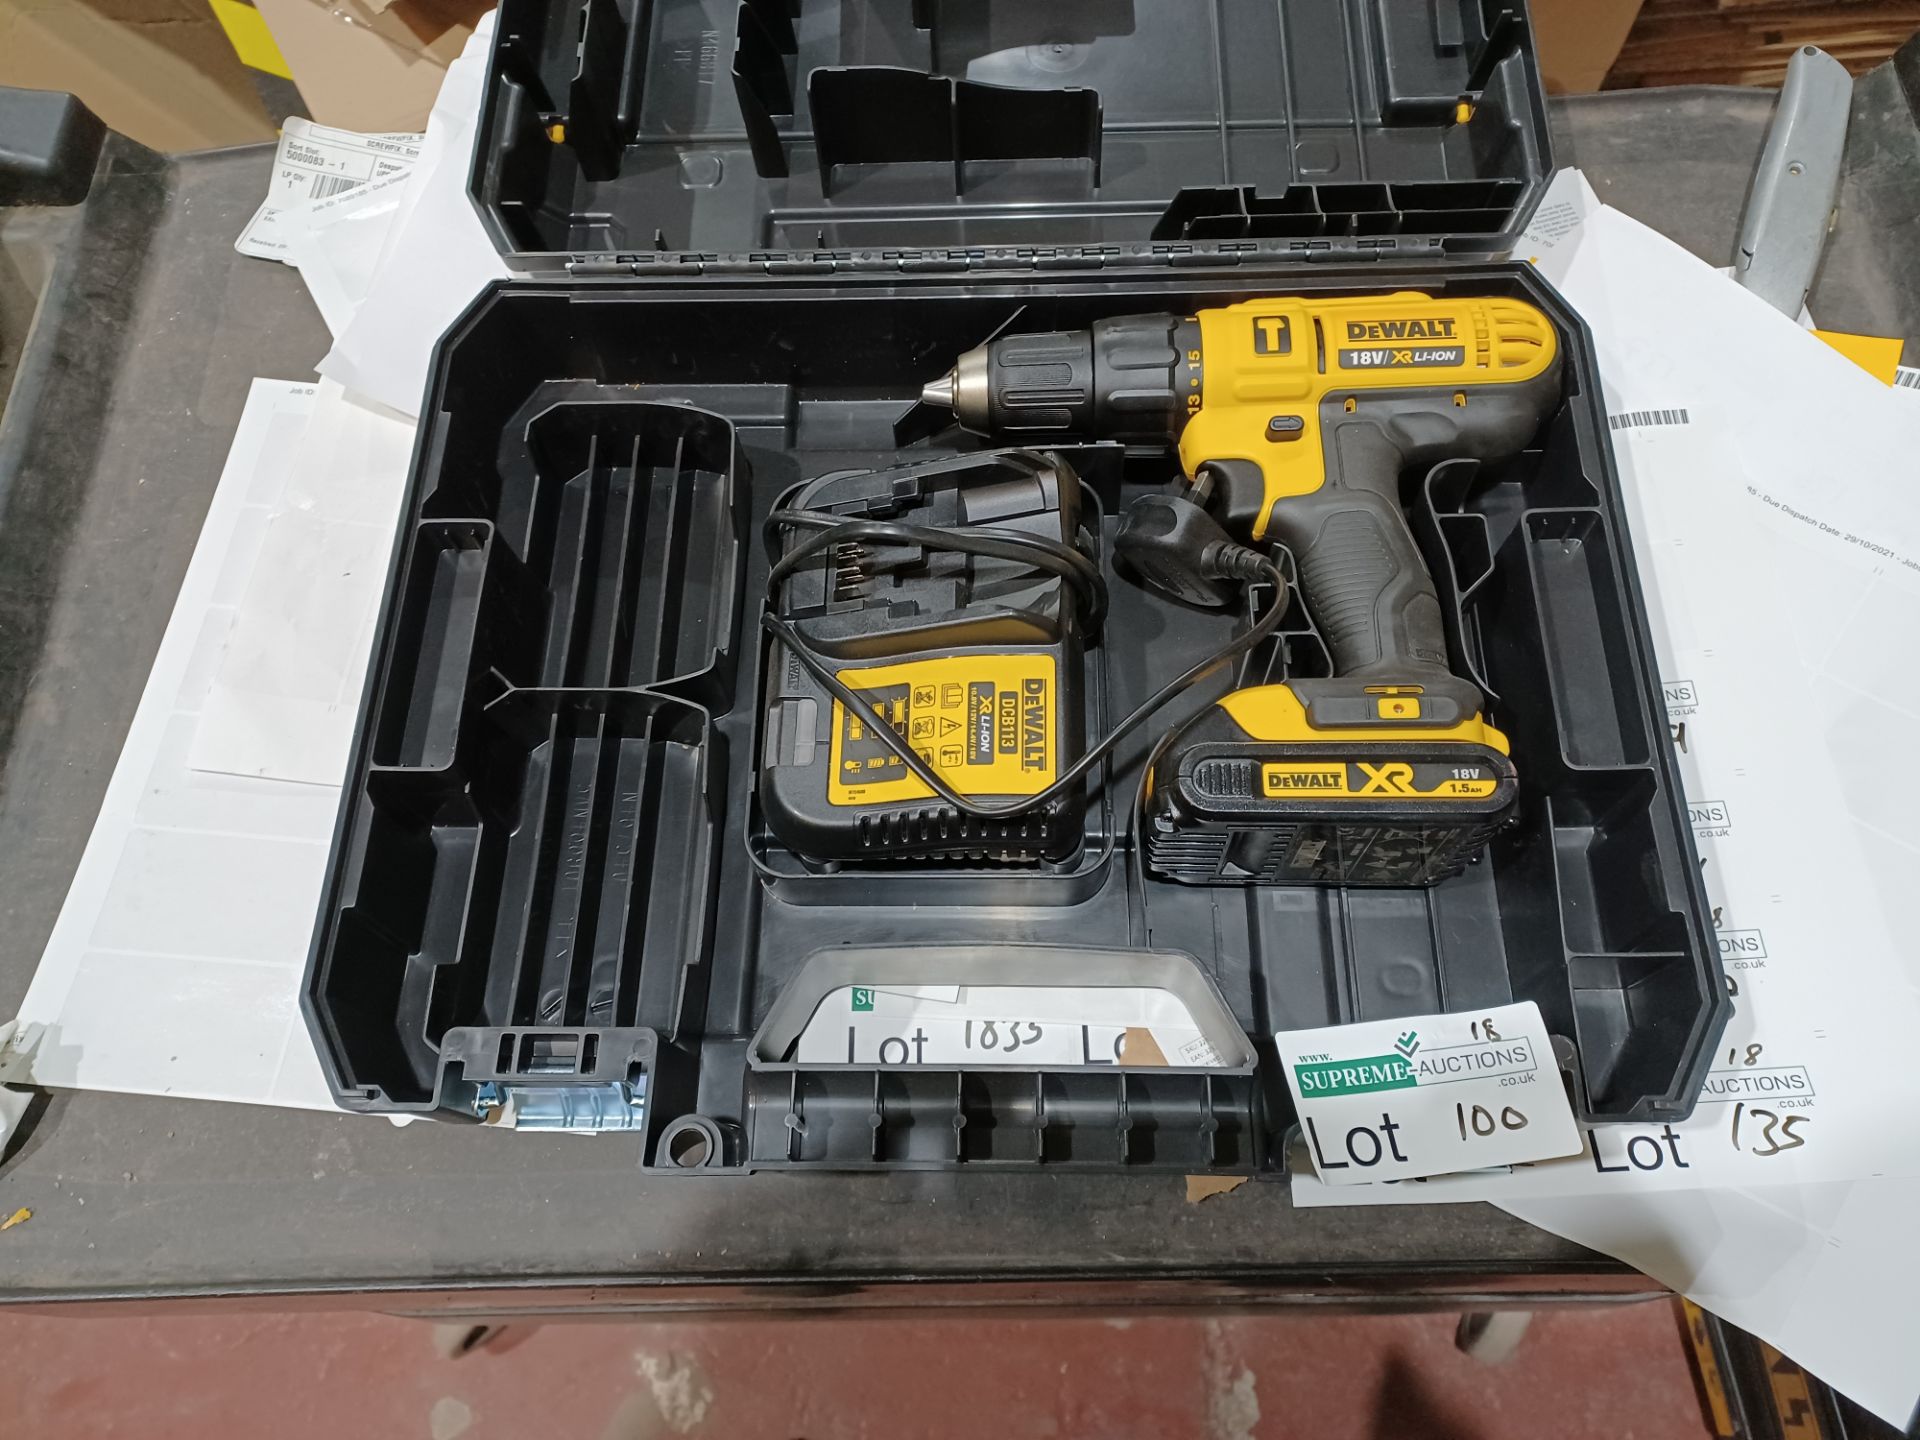 DEWALT DCD776D2T- GB 18V 2.0AH LI-ION XR CORDLESS COMBI DRILL WITH BATTERY CHARGER AND CARRY CASE